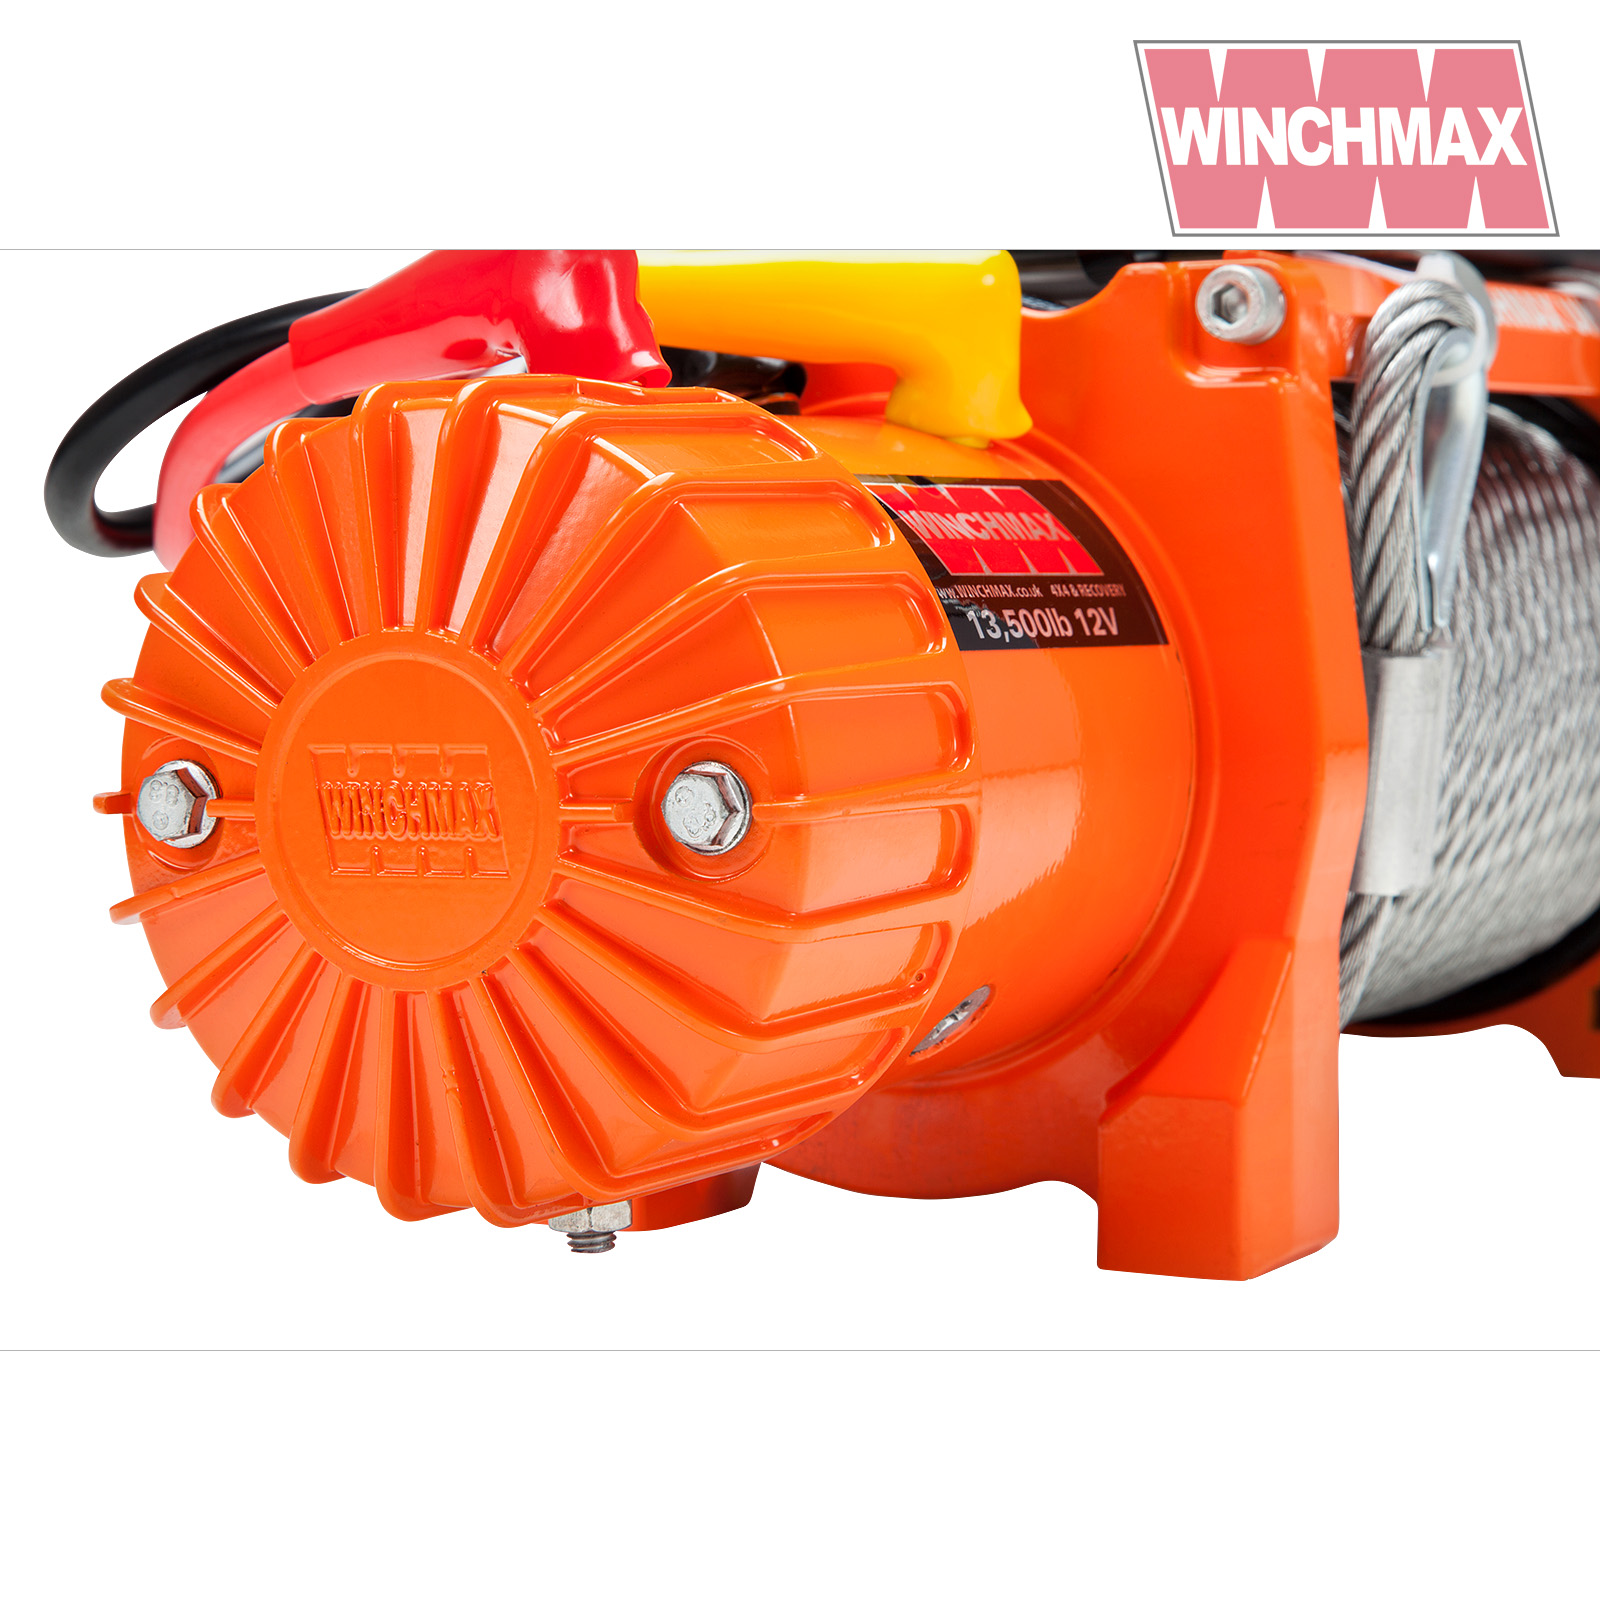 Winchmax 13500 12v Winch and Mounting Plate